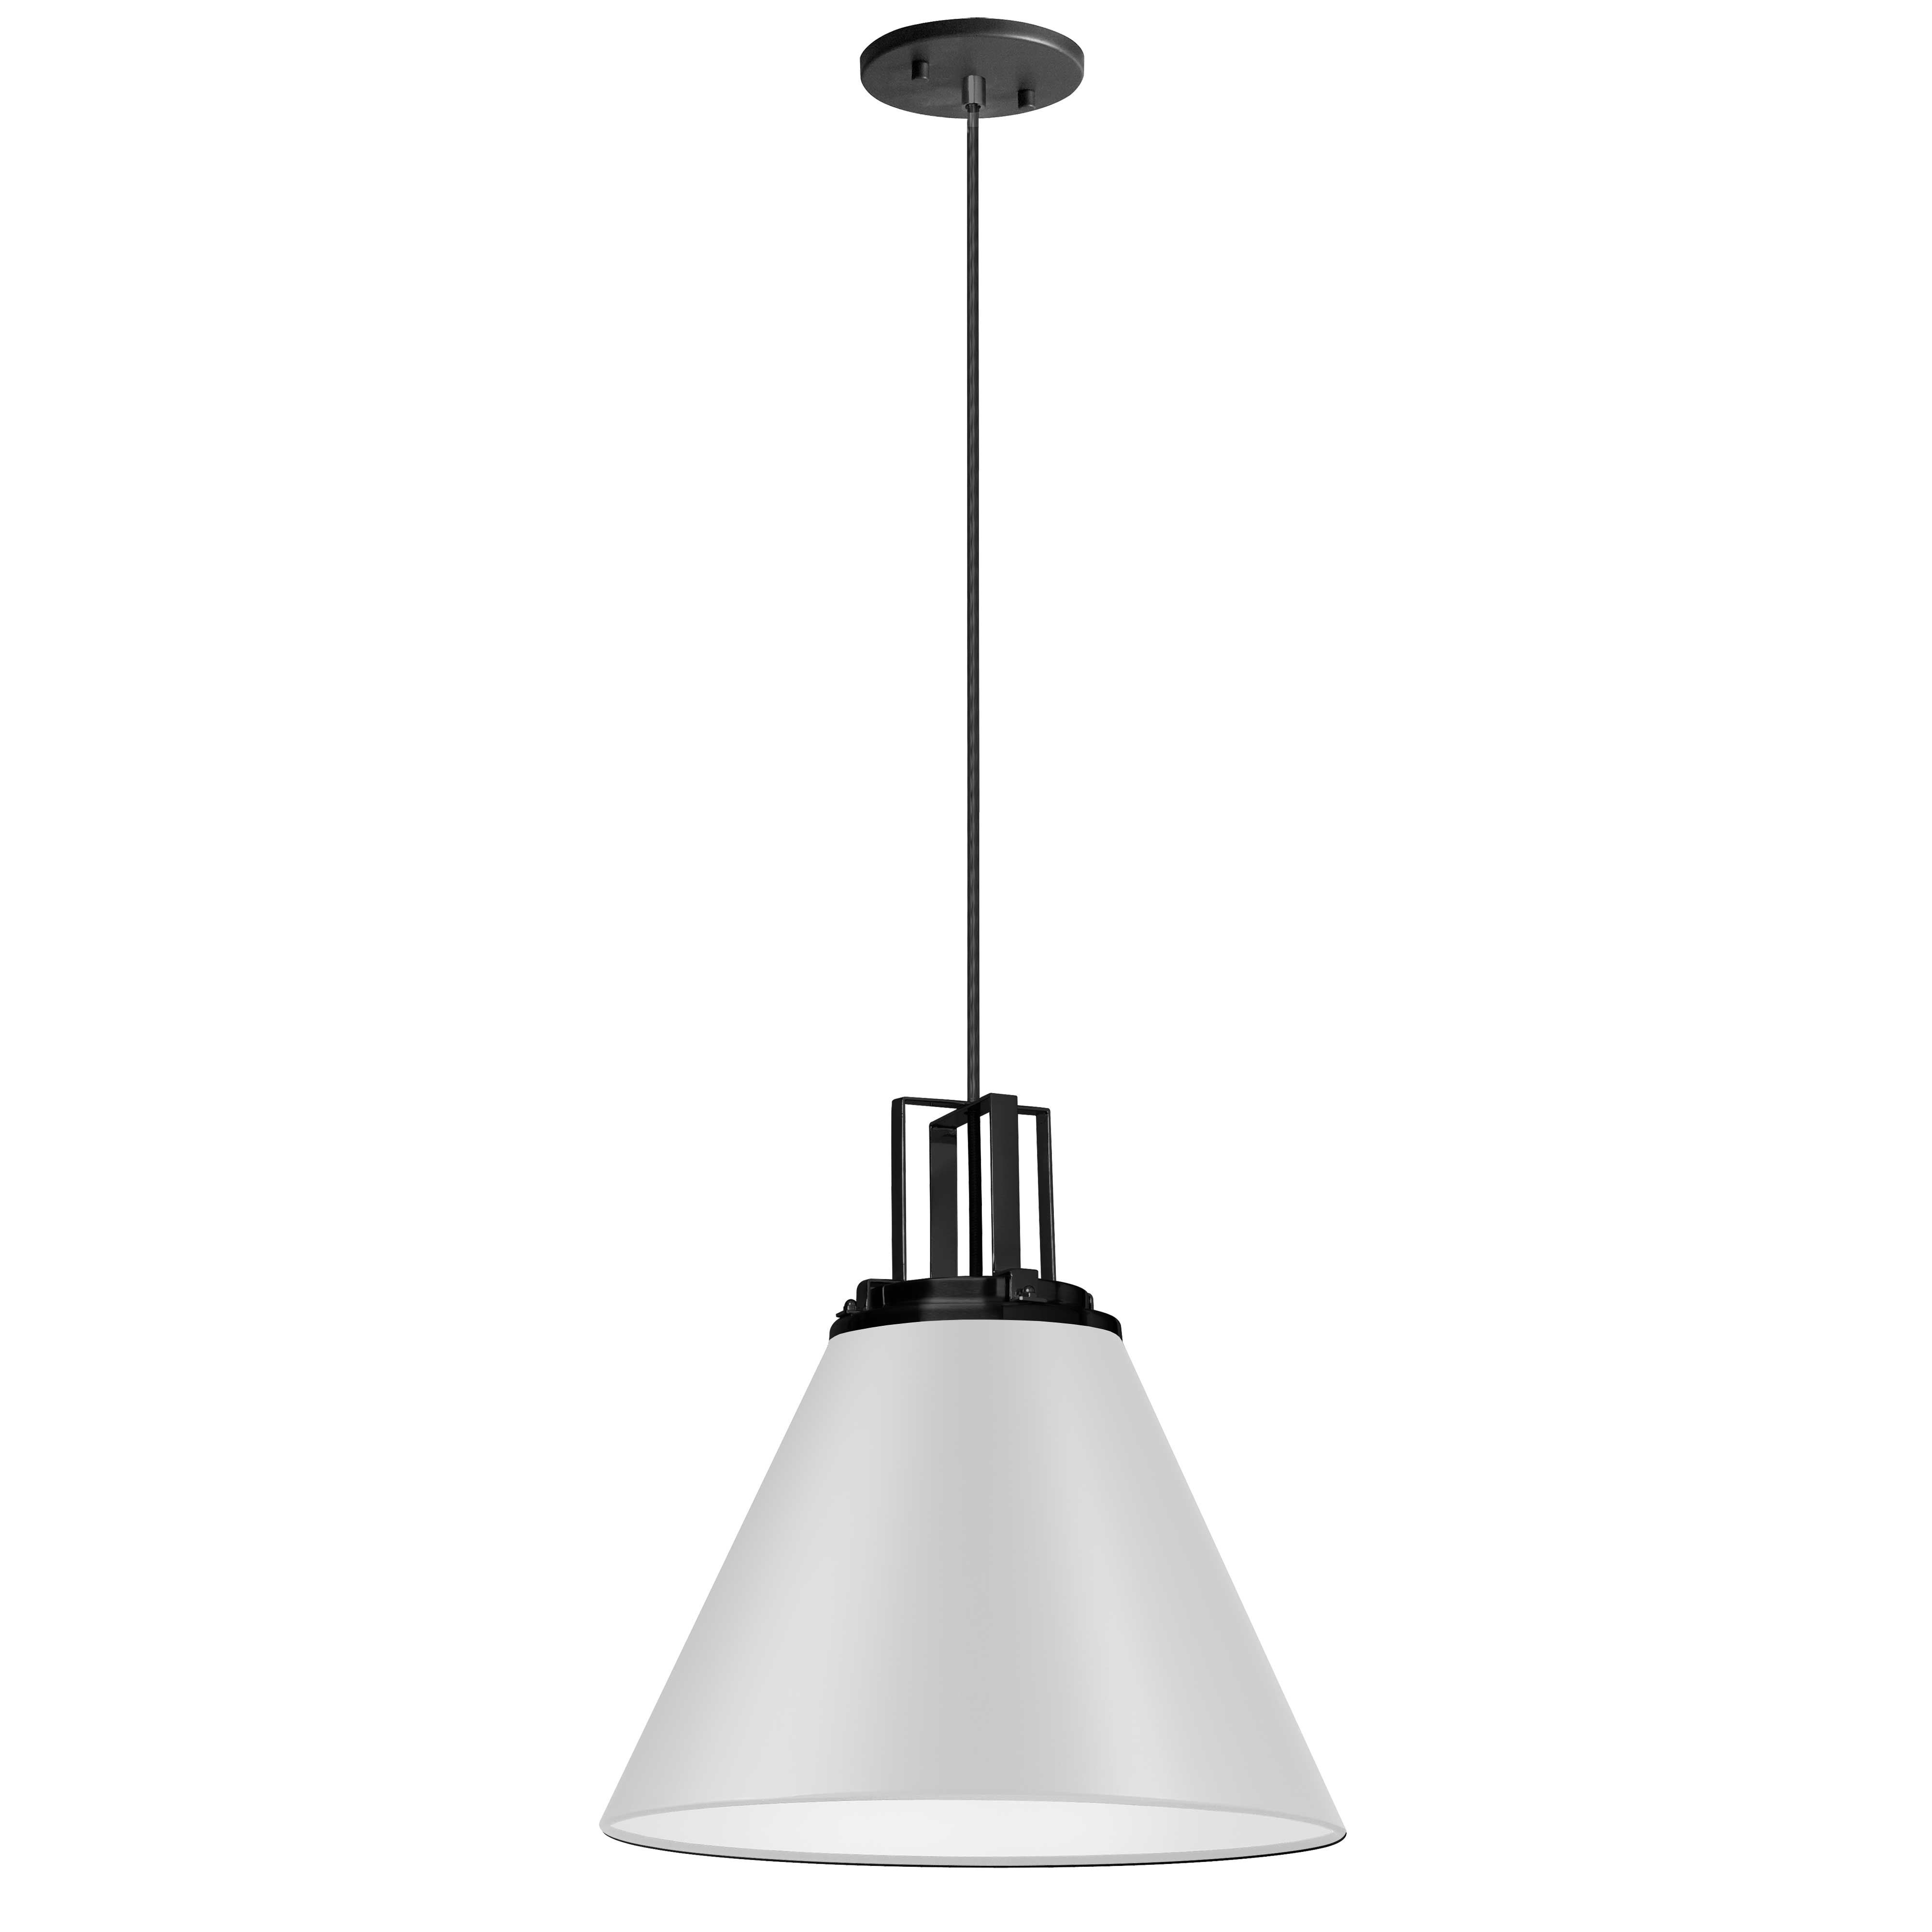 Sleek lines and eye-catching detail create the high fashion contemporary style of the Sonus family of lighting. Color variations give it several different moods from chic monochromatic black to captivating contrasts. The all metal construction begins with a simple cord drop, and a squared linear element at the top, contrasting the longer, curved lines of the tapered drum style shade. It's a contemporary look inspired by classic lighting designs. Sonus lighting adds an undeniable note of luxury to kitchens, dining rooms and main hallways.